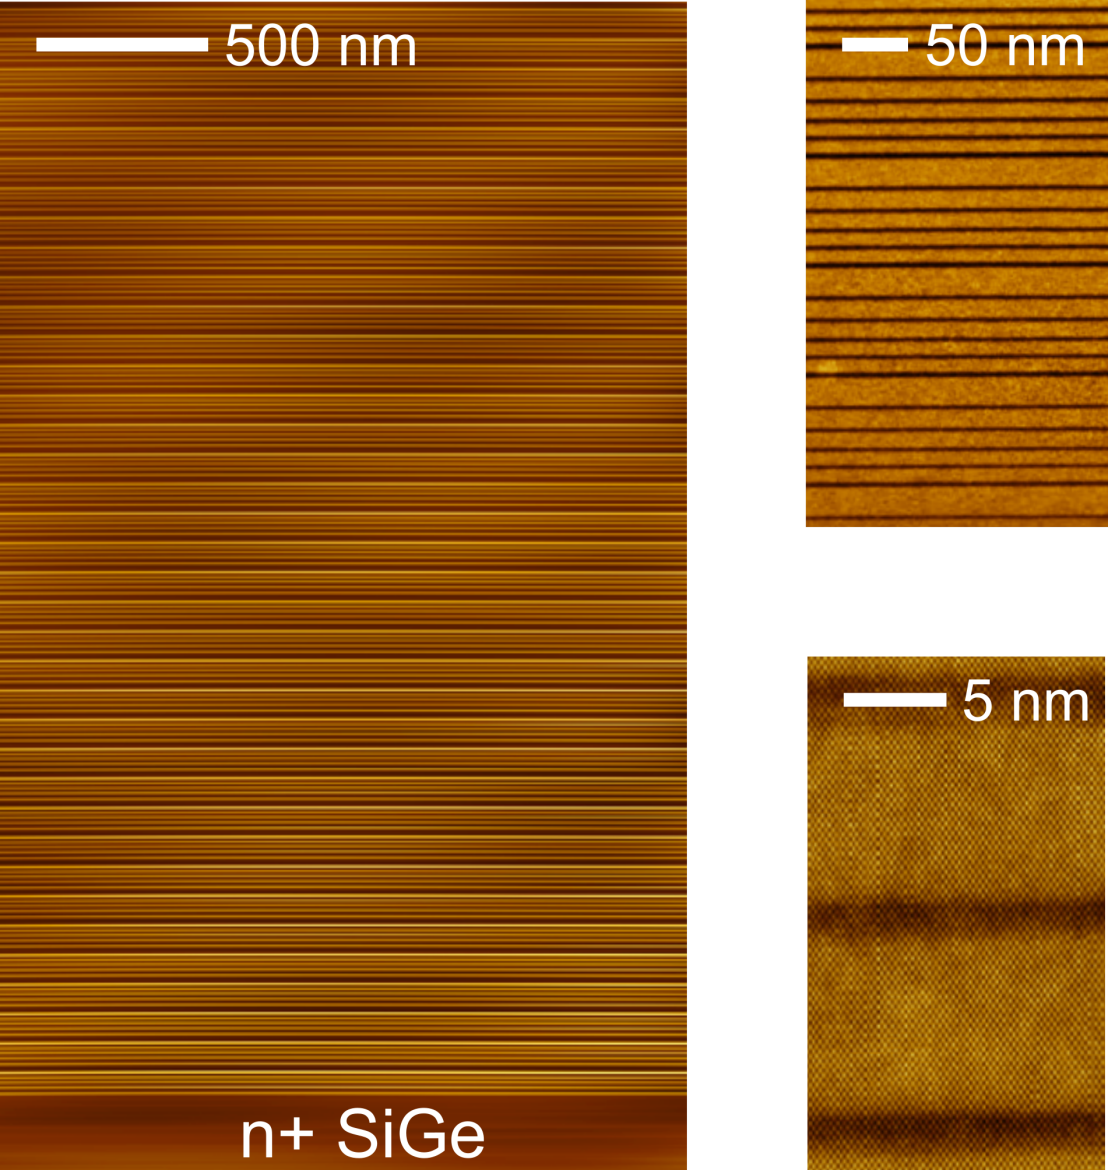 Enlarged view: STEM images of one of the Ge/SiGe heterostructures